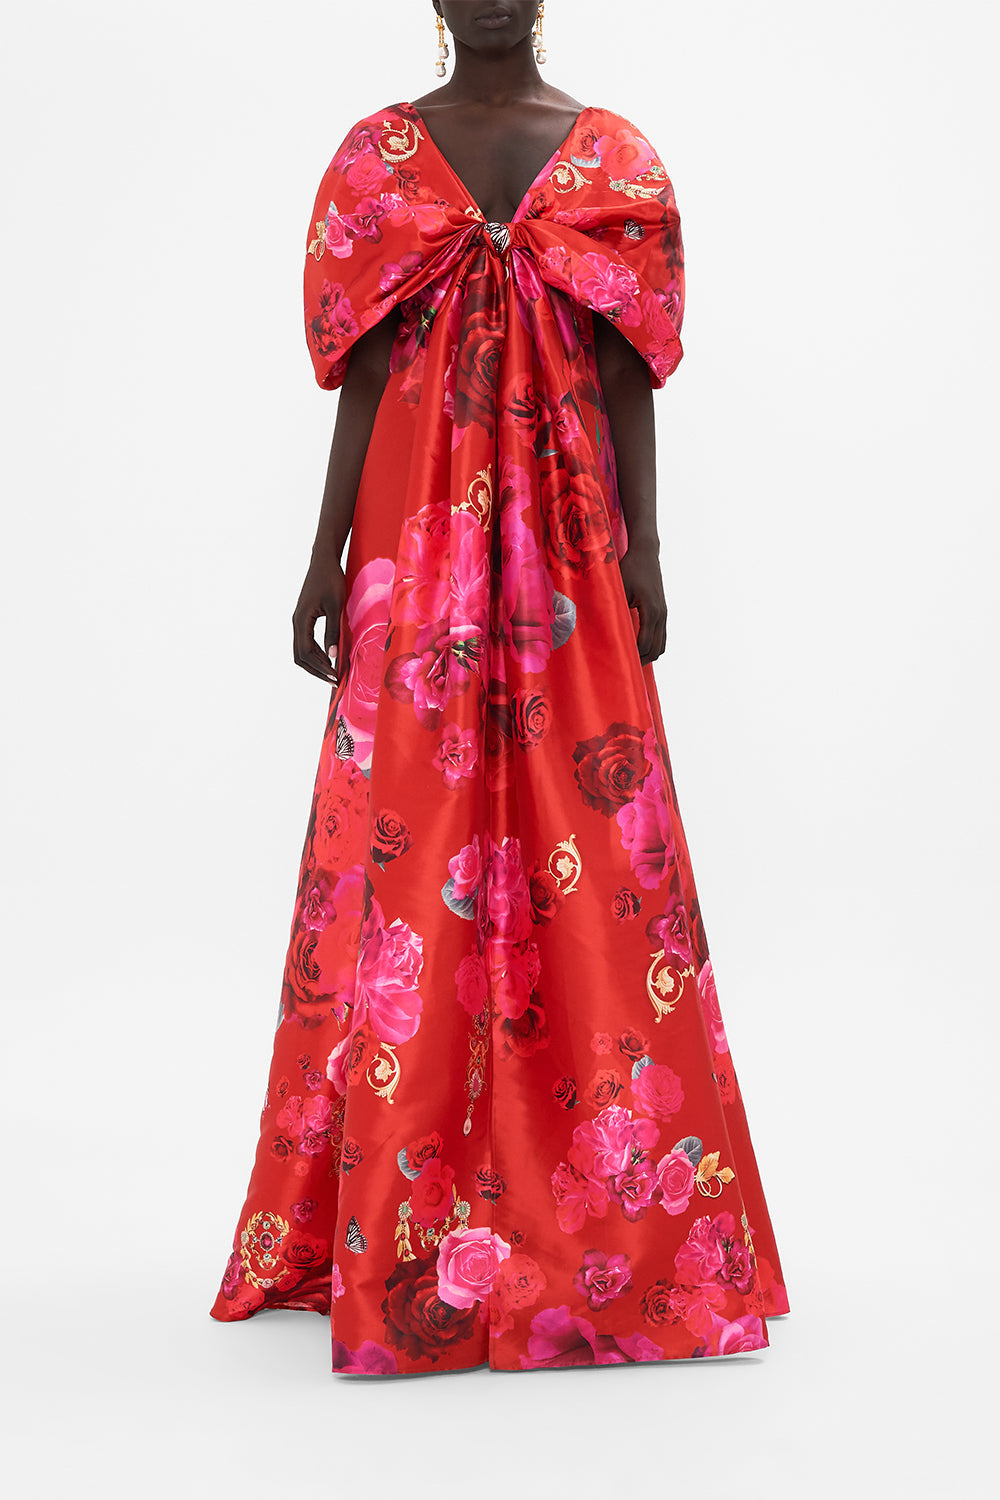 Front view of model wearing CAMILLA taffeta maxi dress with bow detail in An Italian Rosa print  